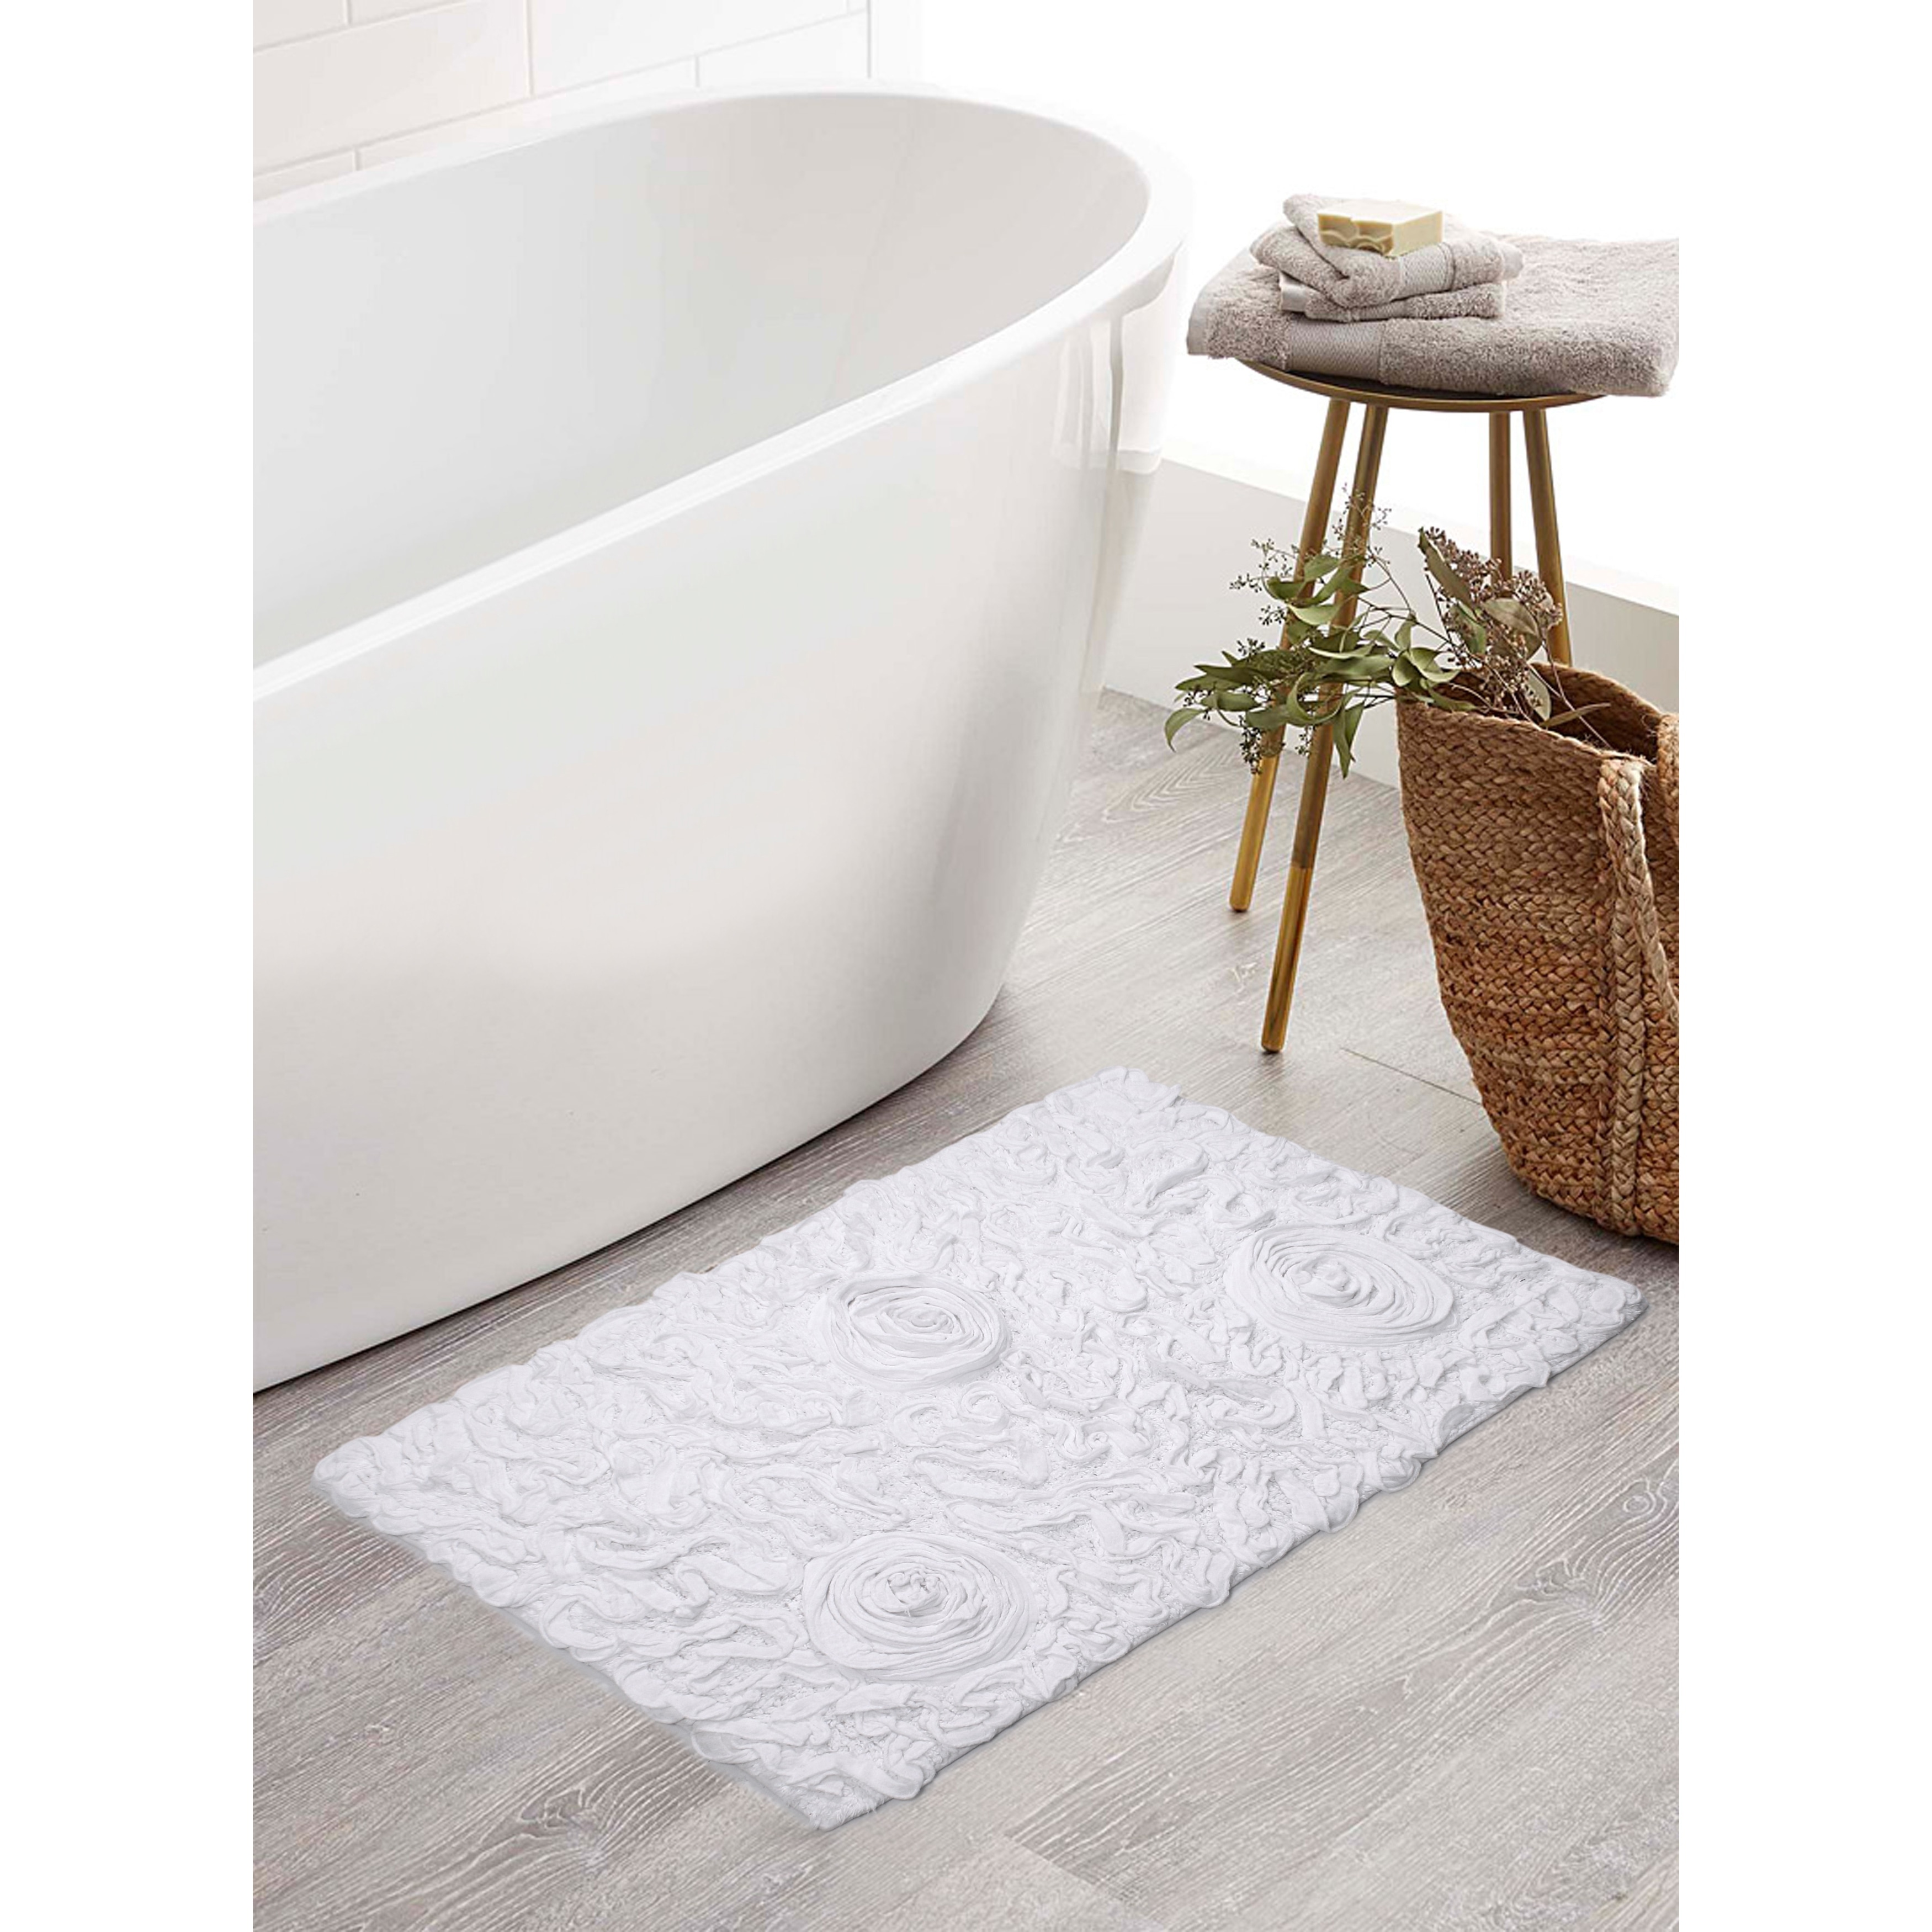 https://ak1.ostkcdn.com/images/products/is/images/direct/2d3ae33755812588669557772d05cc3435cc7666/Bell-Flower-Bathroom-Rug%2C-Cotton-Soft%2C-Water-Absorbent-Bath-Rug%2C-Non-Slip-Shower-Rug-Machine-Washable-21%22x34%22-Rectangle.jpg